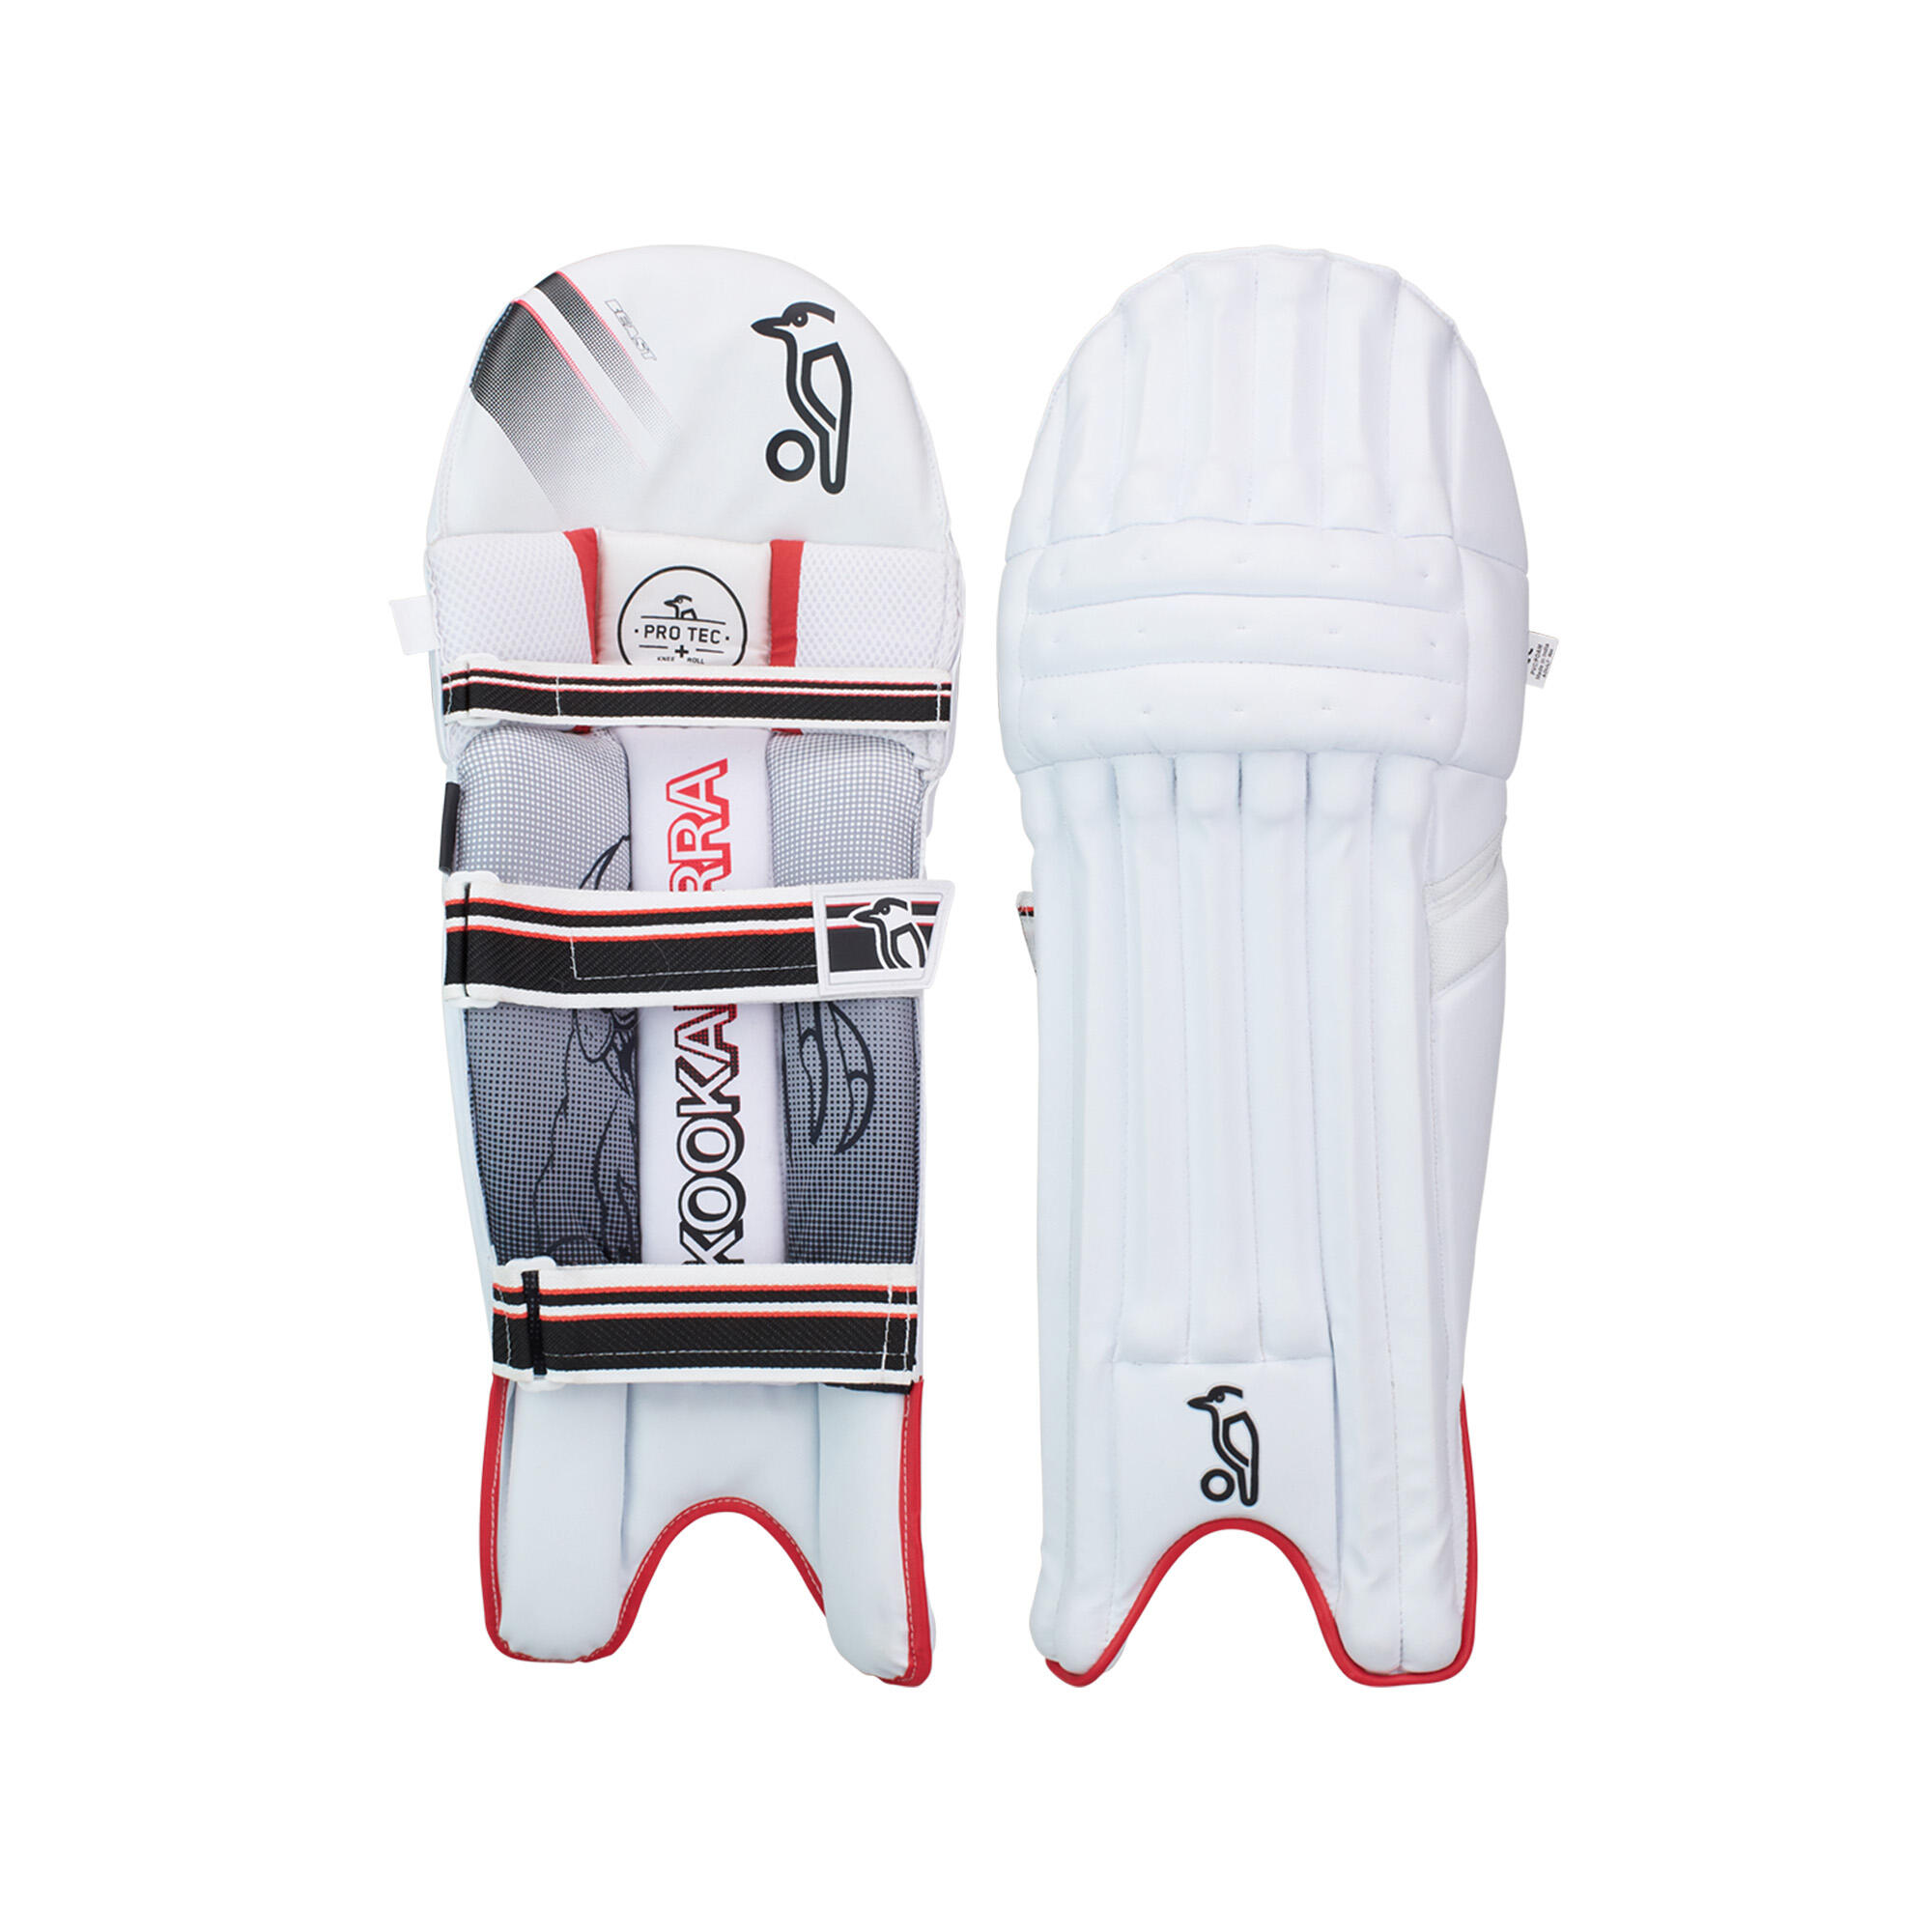 Kookaburra Cricket Protective Shorts Without Padding Thigh & Inner Protection 